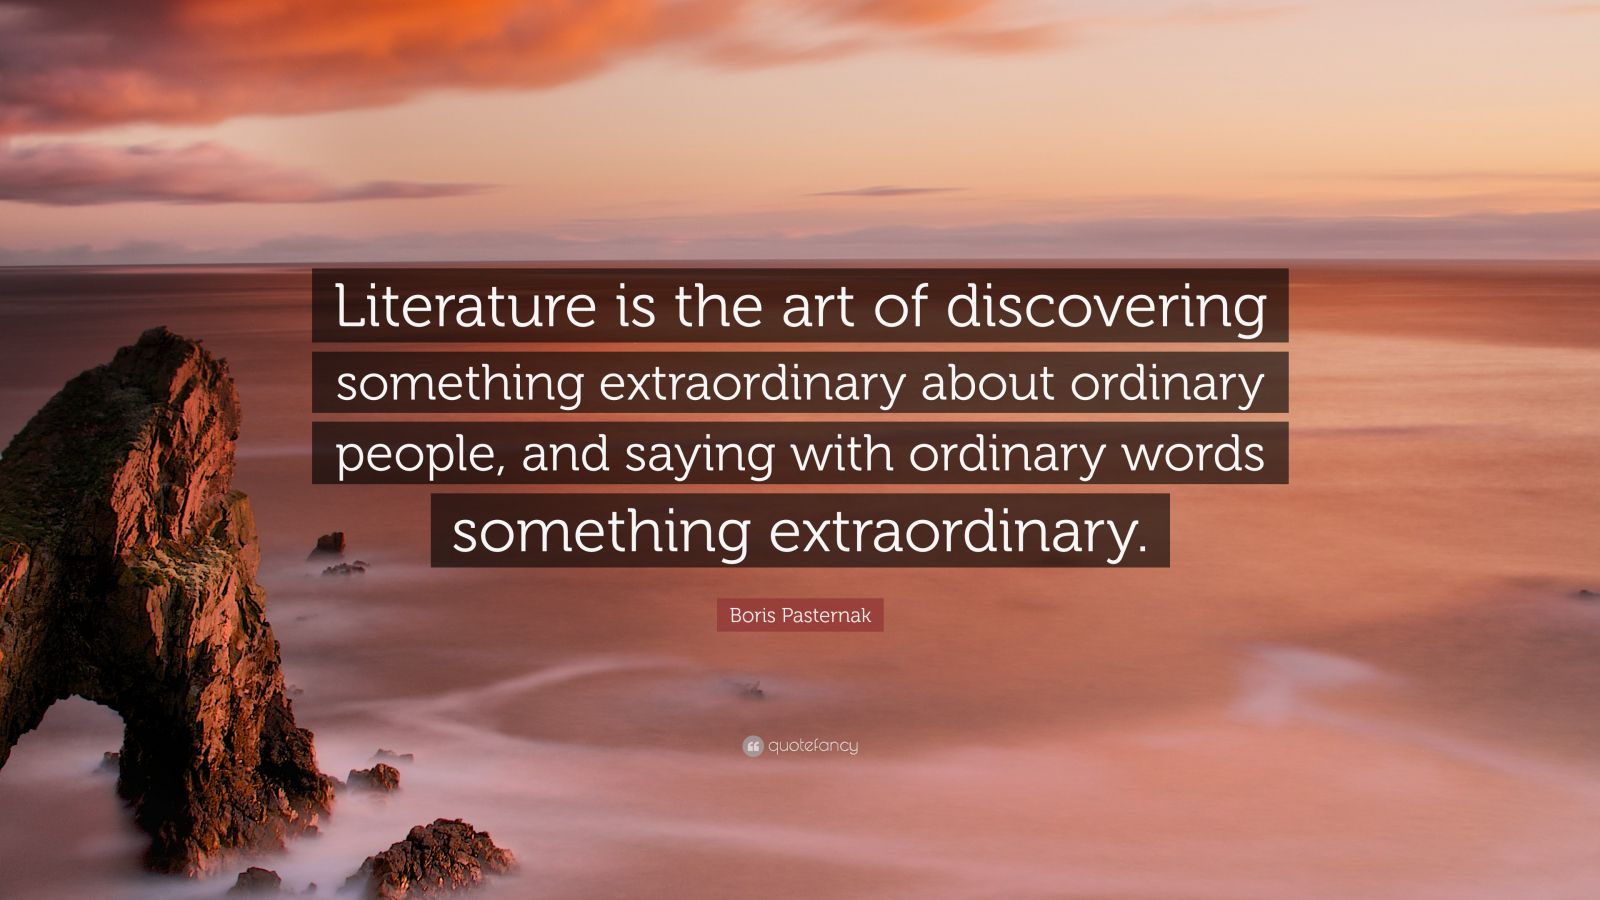 Boris Pasternak Quote: “Literature is the art of discovering something